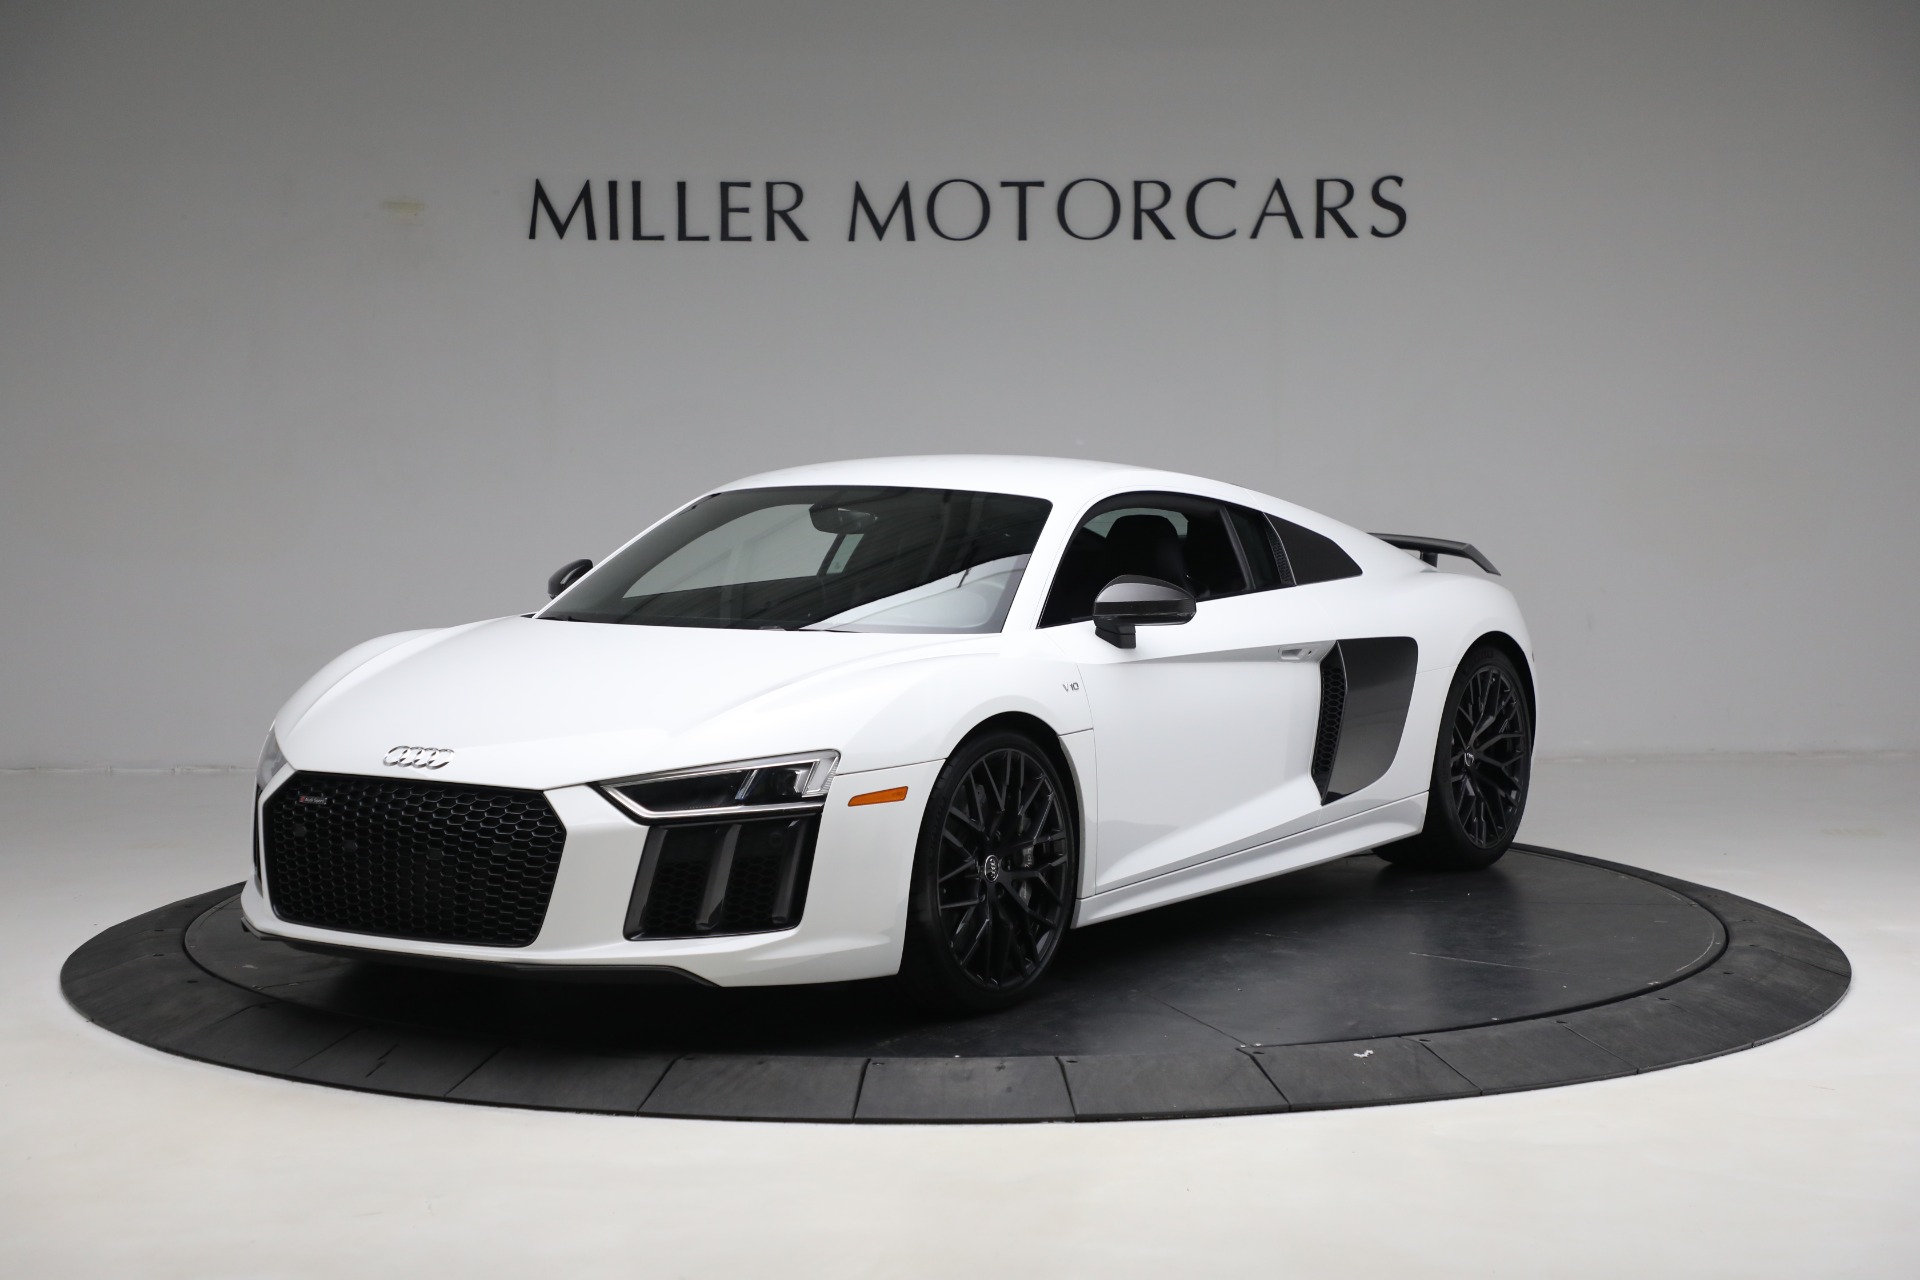 Used 2018 Audi R8 5.2 quattro V10 Plus for sale Sold at Rolls-Royce Motor Cars Greenwich in Greenwich CT 06830 1